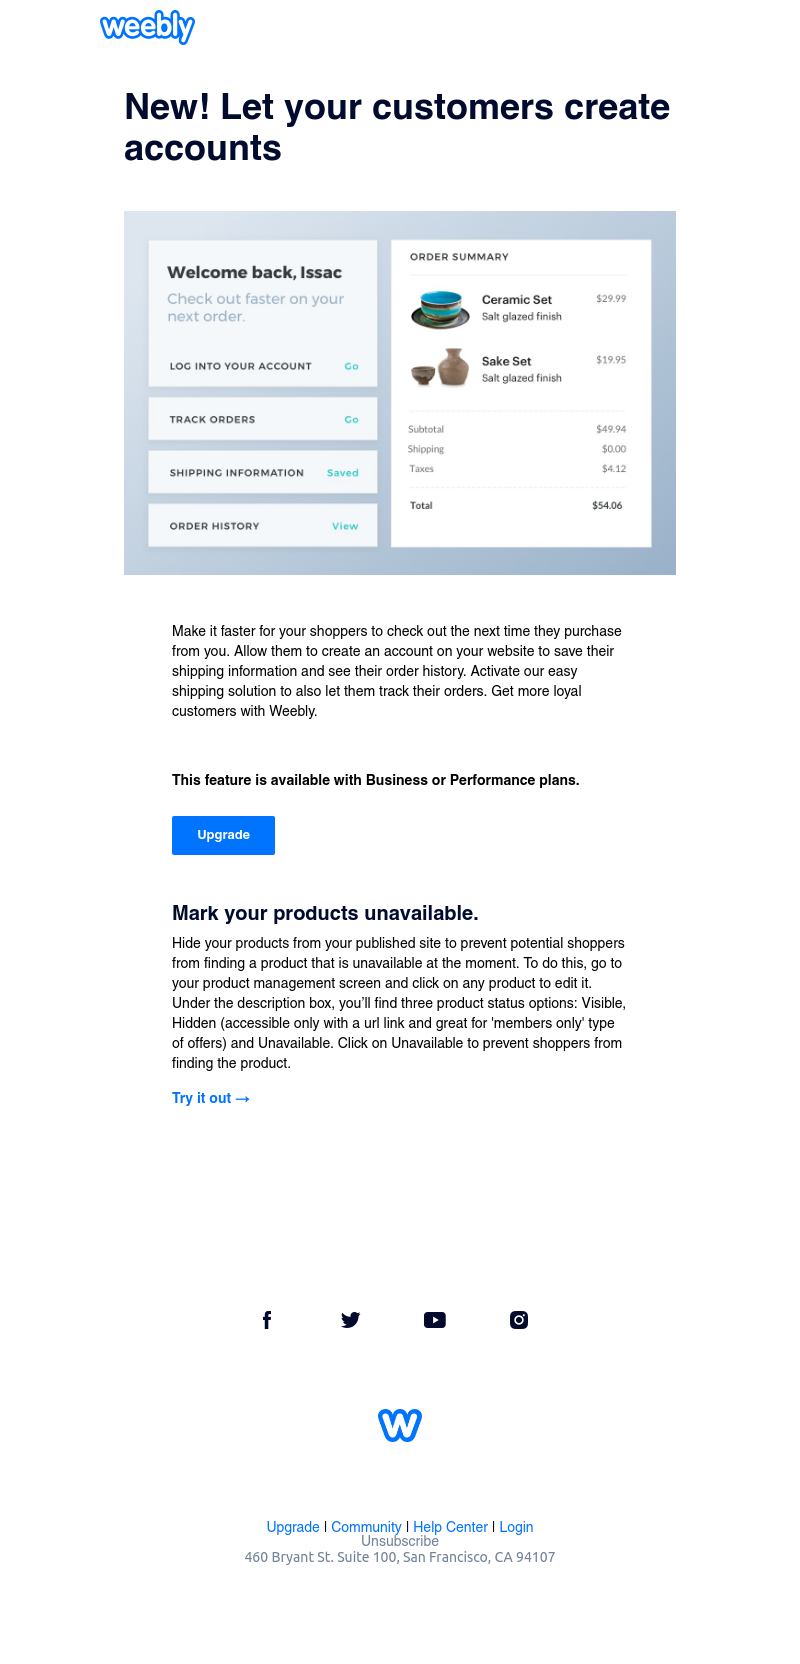 Screenshot of email with subject /media/emails/d262de55-f165-48b3-8751-90b66a714b7e.png